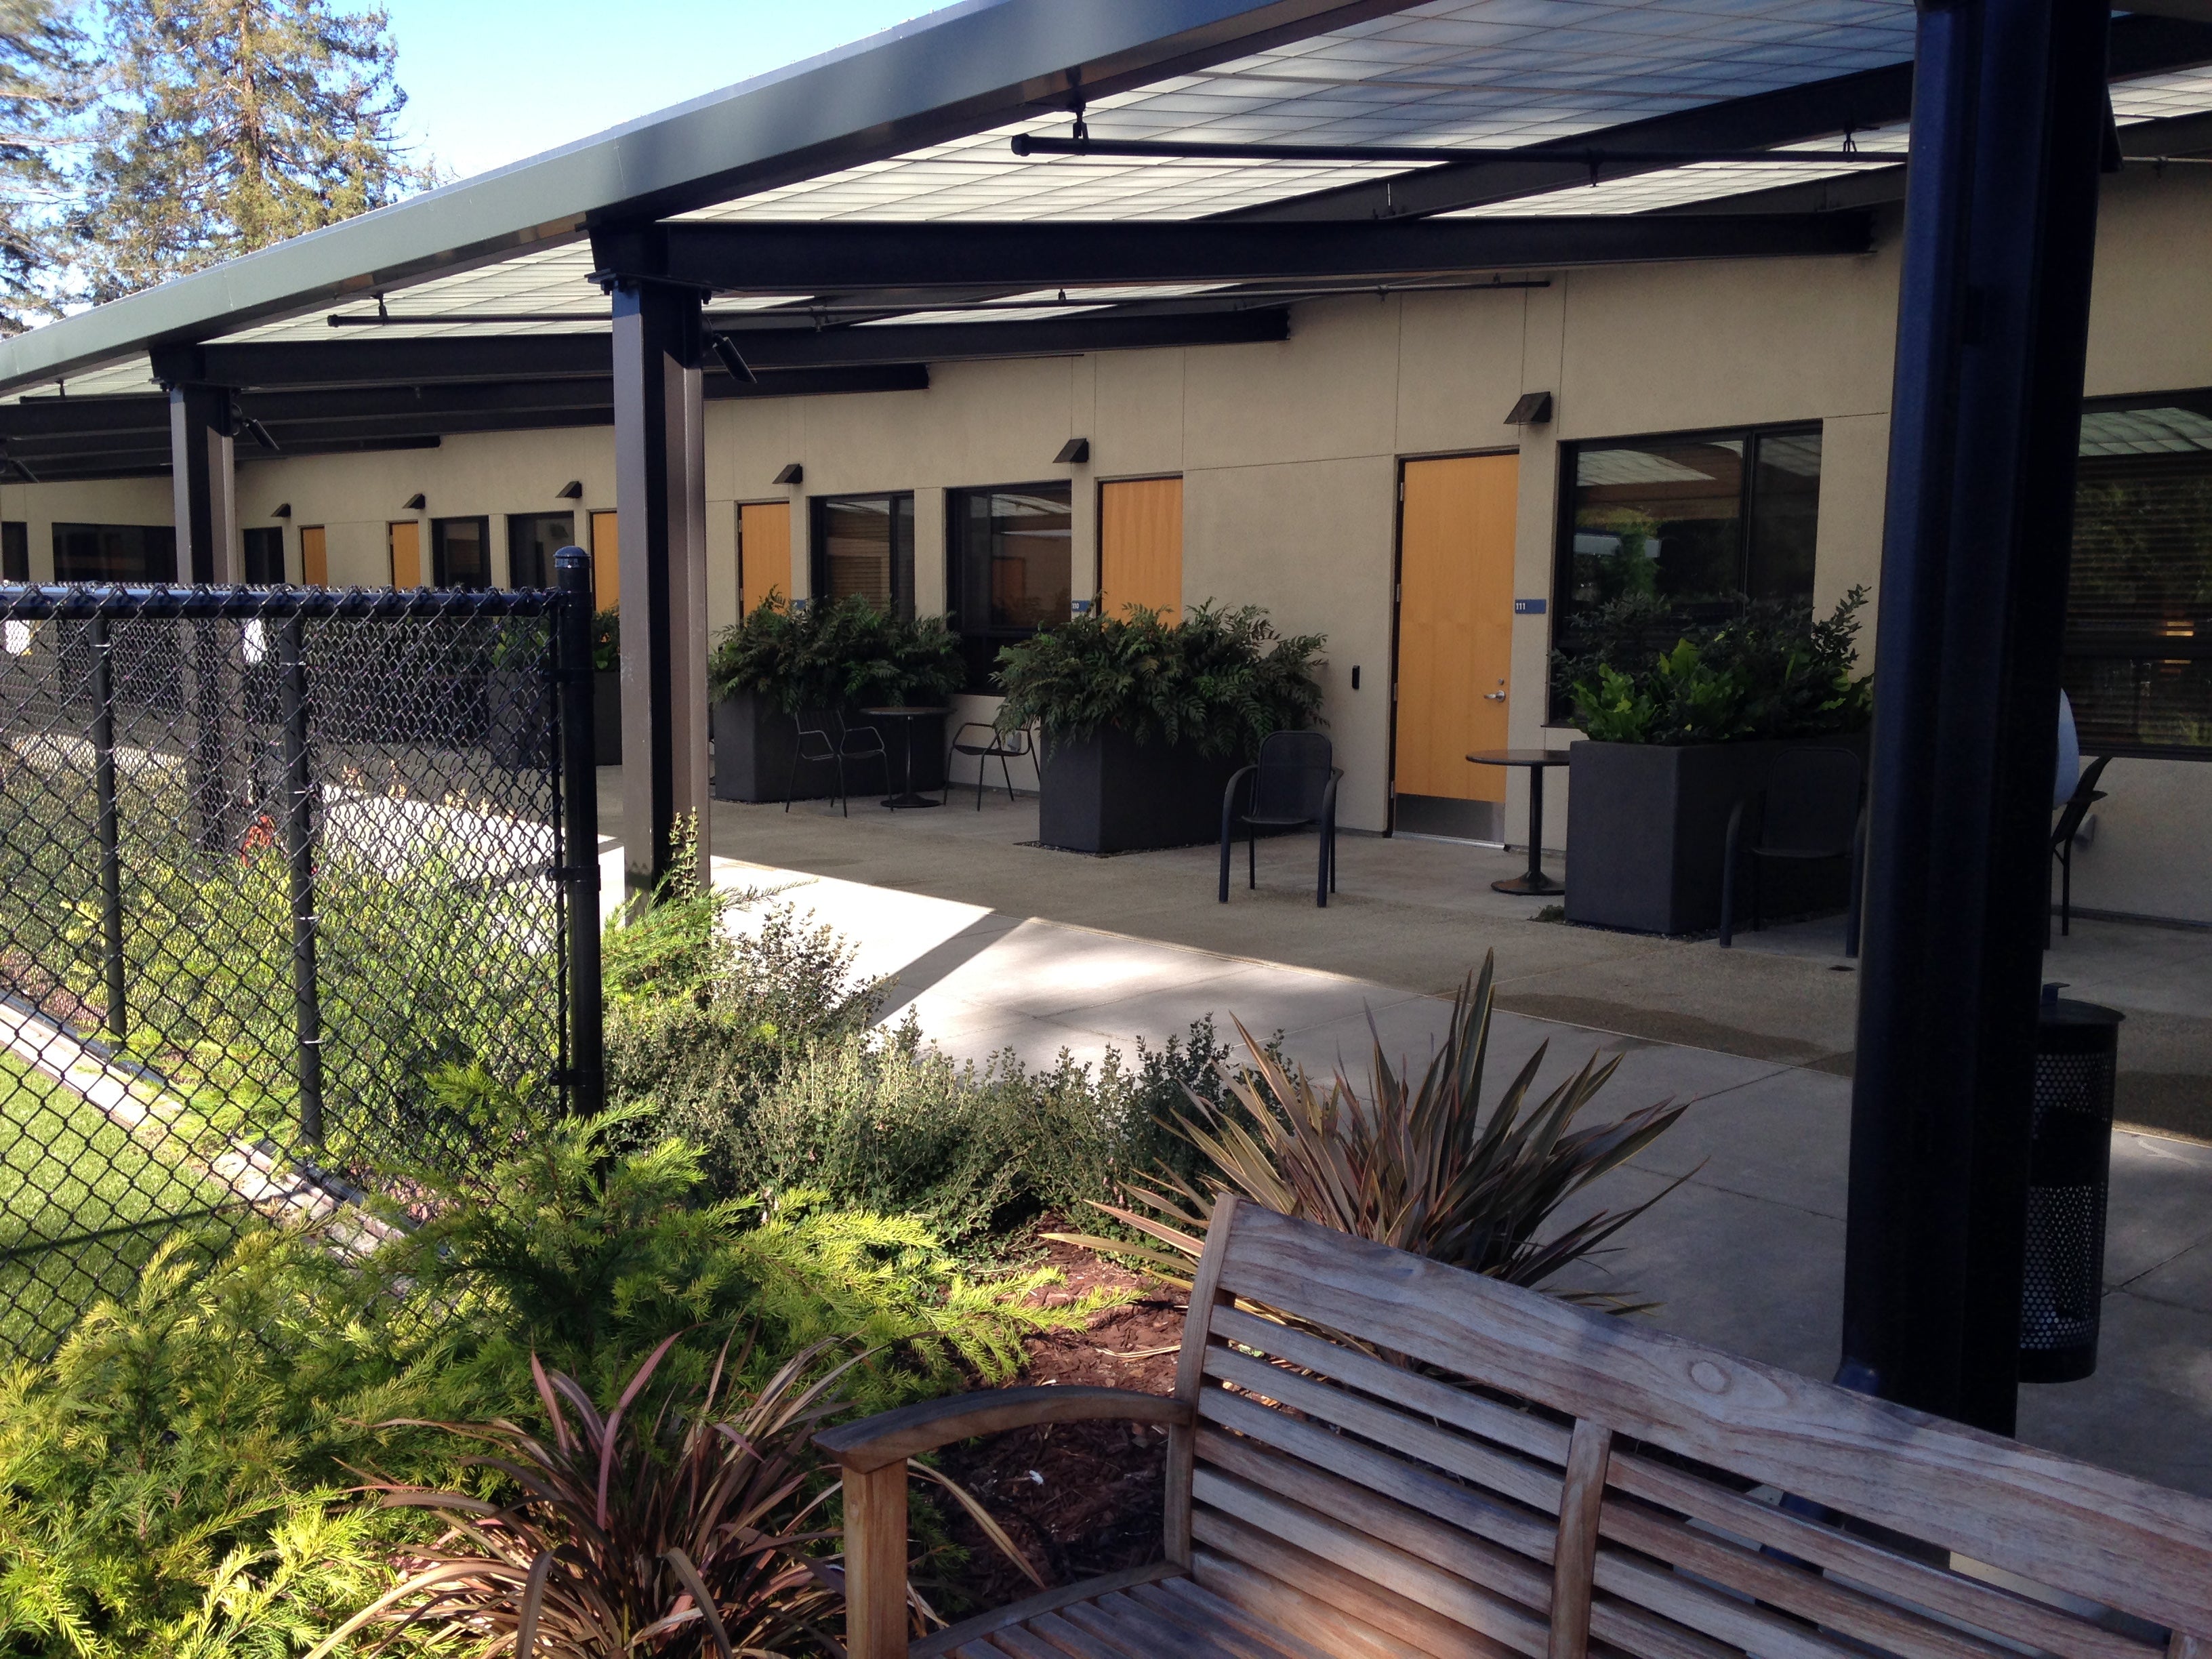 This is one of the buildings on the Guide Dogs for the Blind campus in San Rafael, California. 